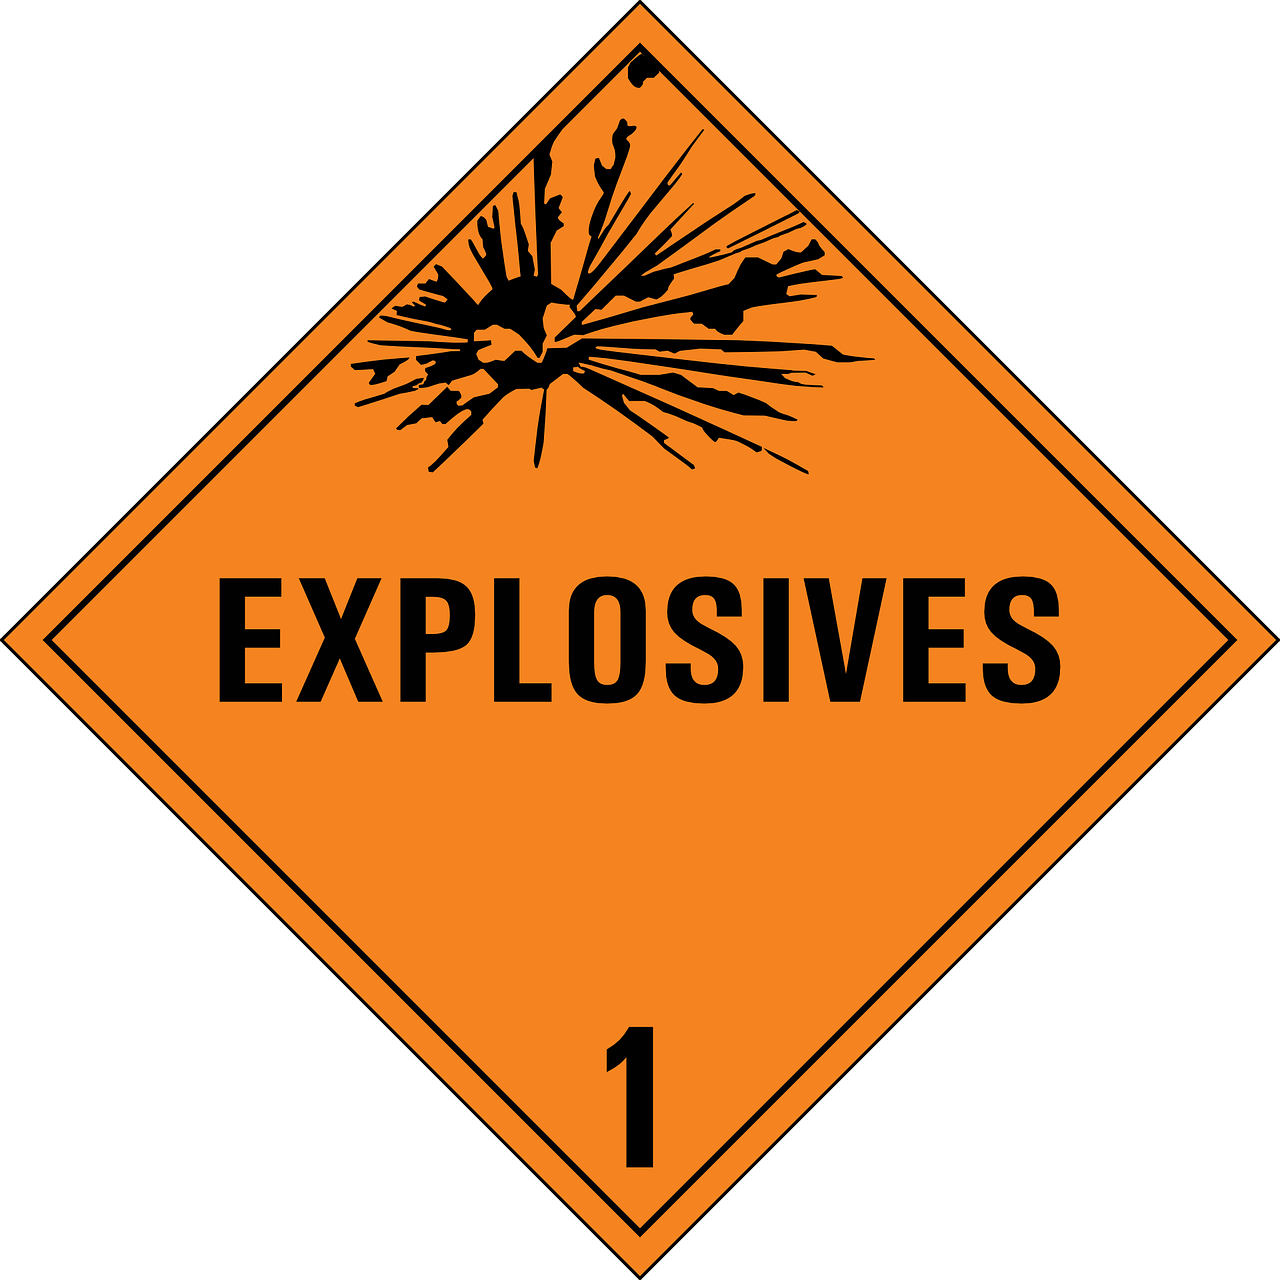 an explosive explosive explosive explosive explosive explosive explosive explosive explosive explosive explosive explosive explosive explosive explosive explosive explosive, pexels, shock art, orange safety labels, high resolution print :1 cmyk :1, chicago, black tar particles